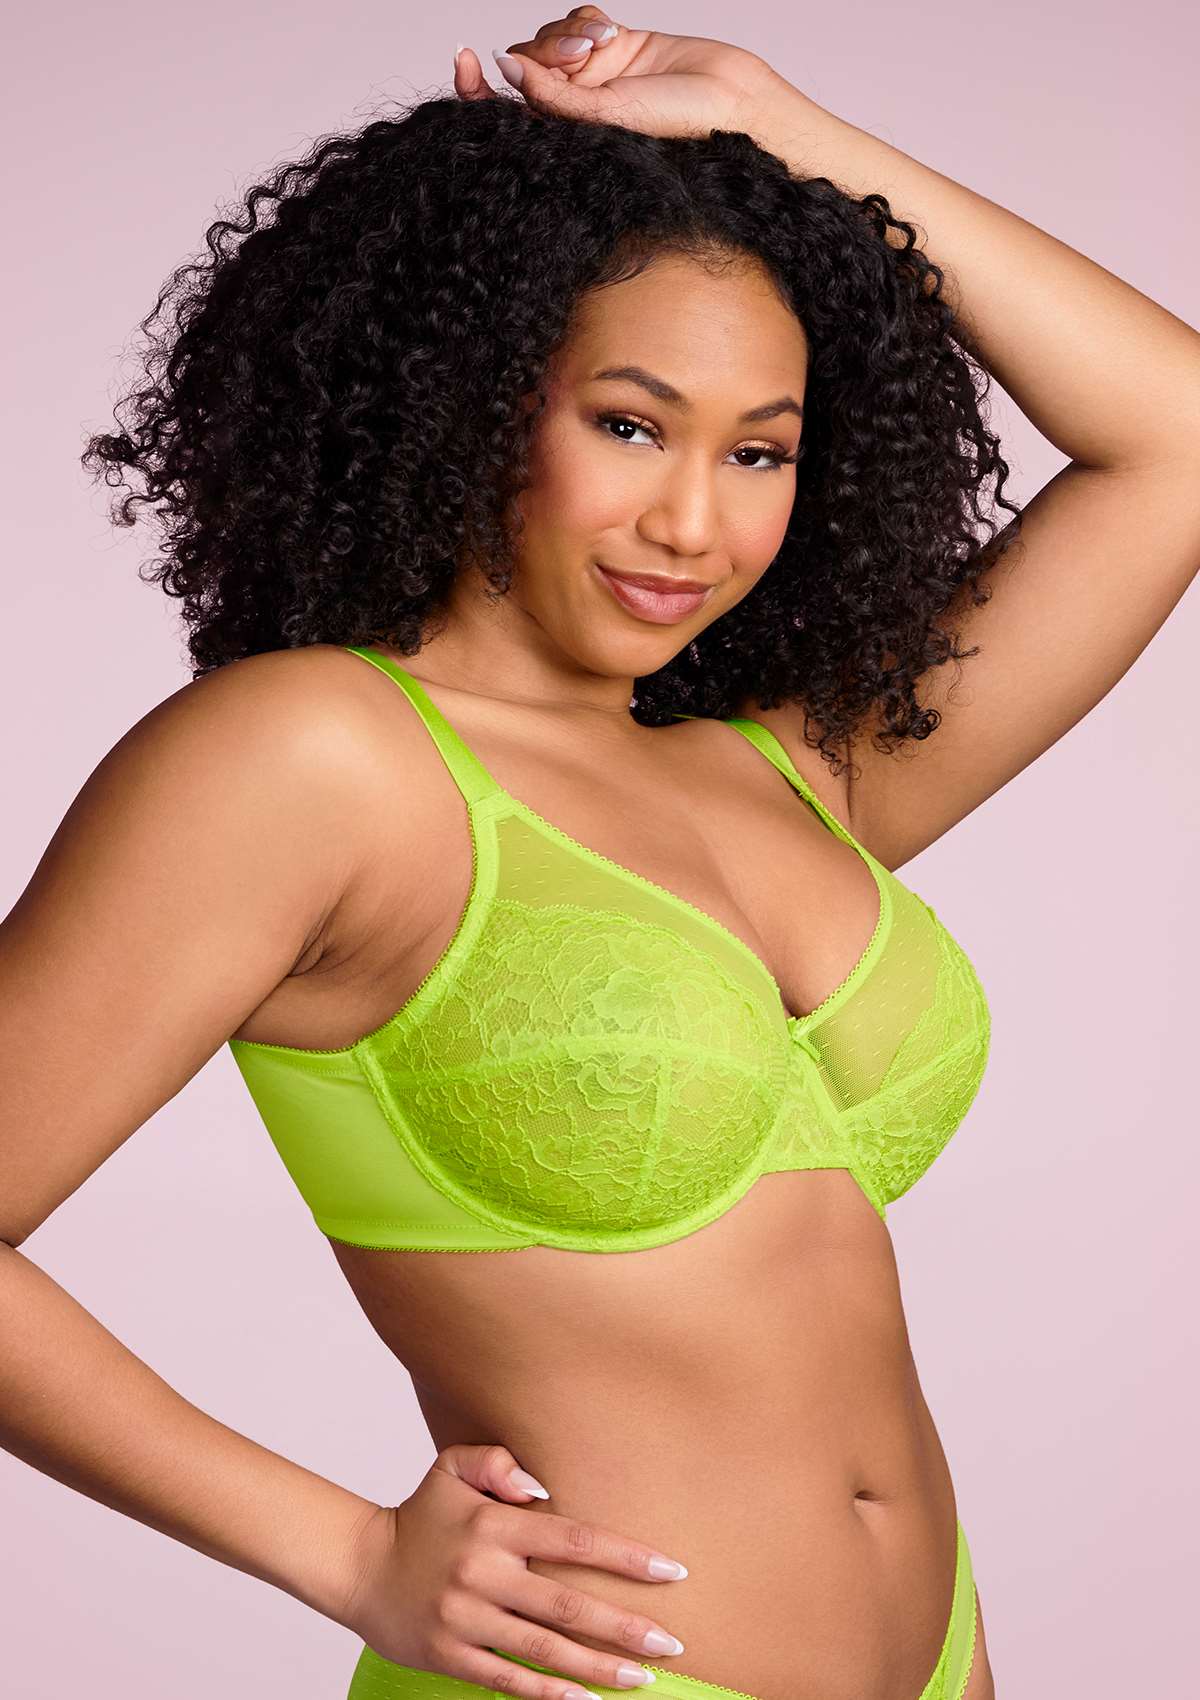 HSIA Enchante Full Cup Minimizing Bra: Supportive Unlined Lace Bra - Lime Green / 44 / G